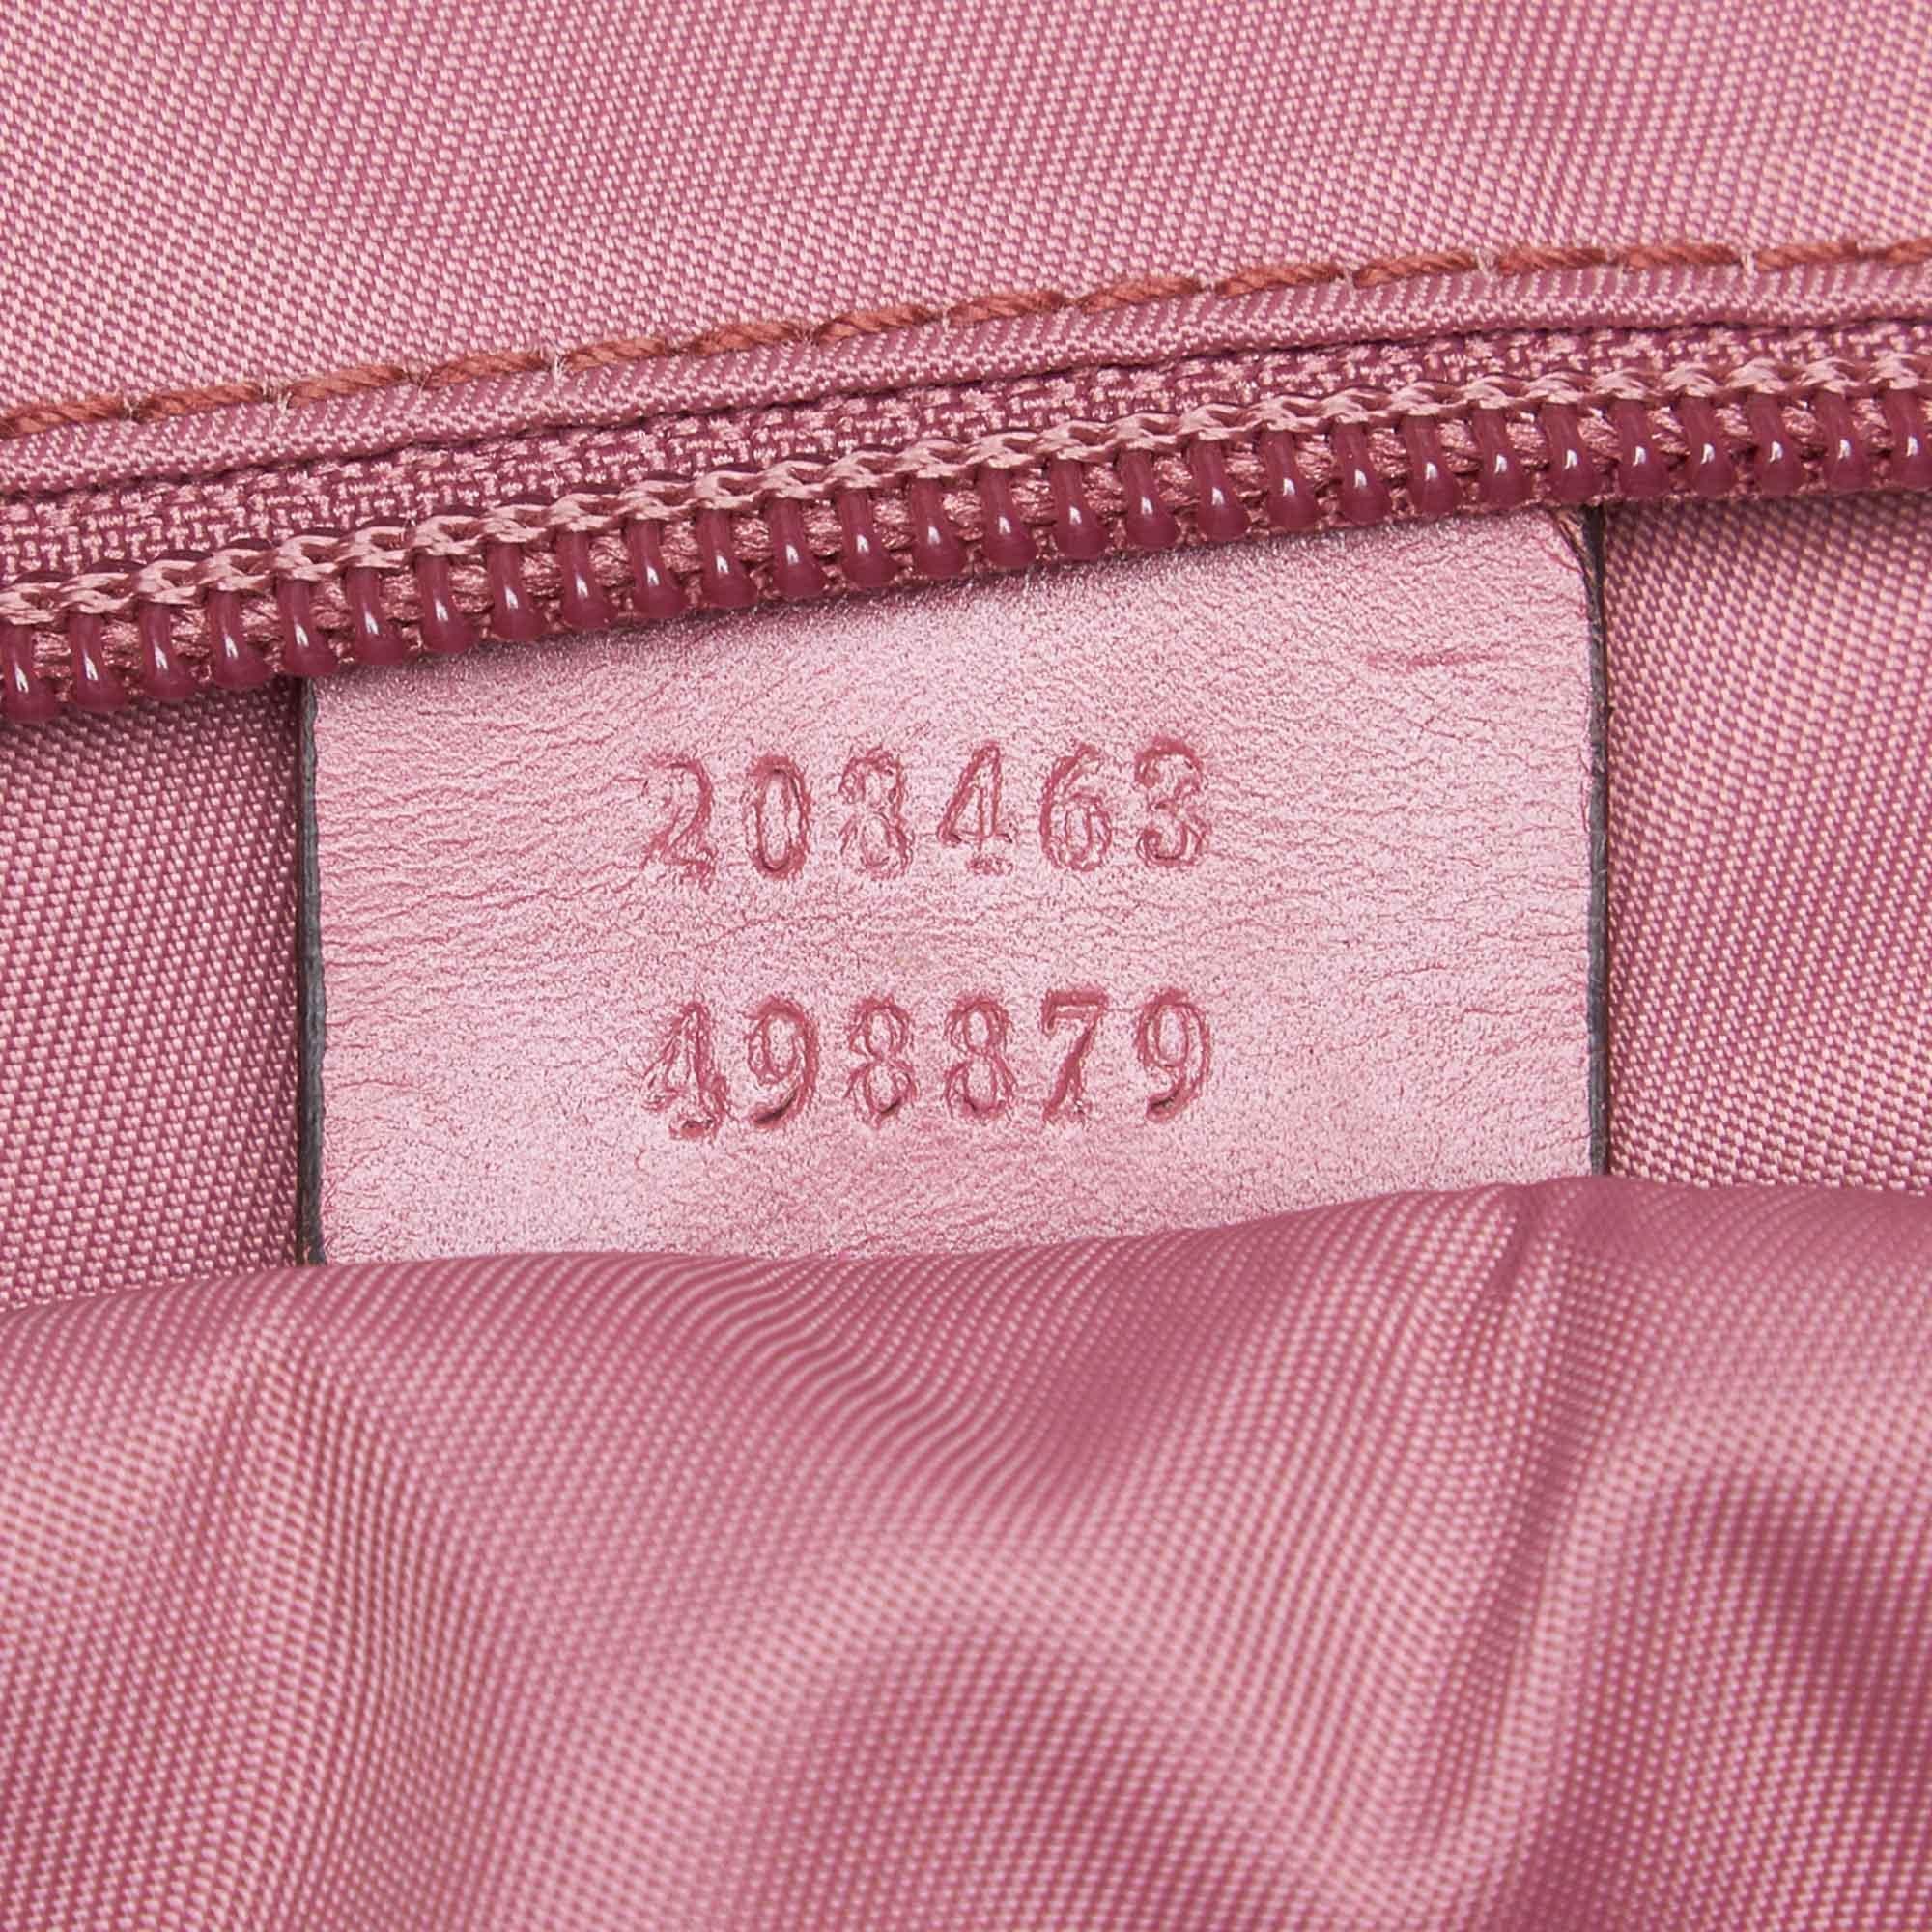 Vintage Authentic Gucci Pink Imprime Business Bag Italy w Padlock Key LARGE  For Sale 3